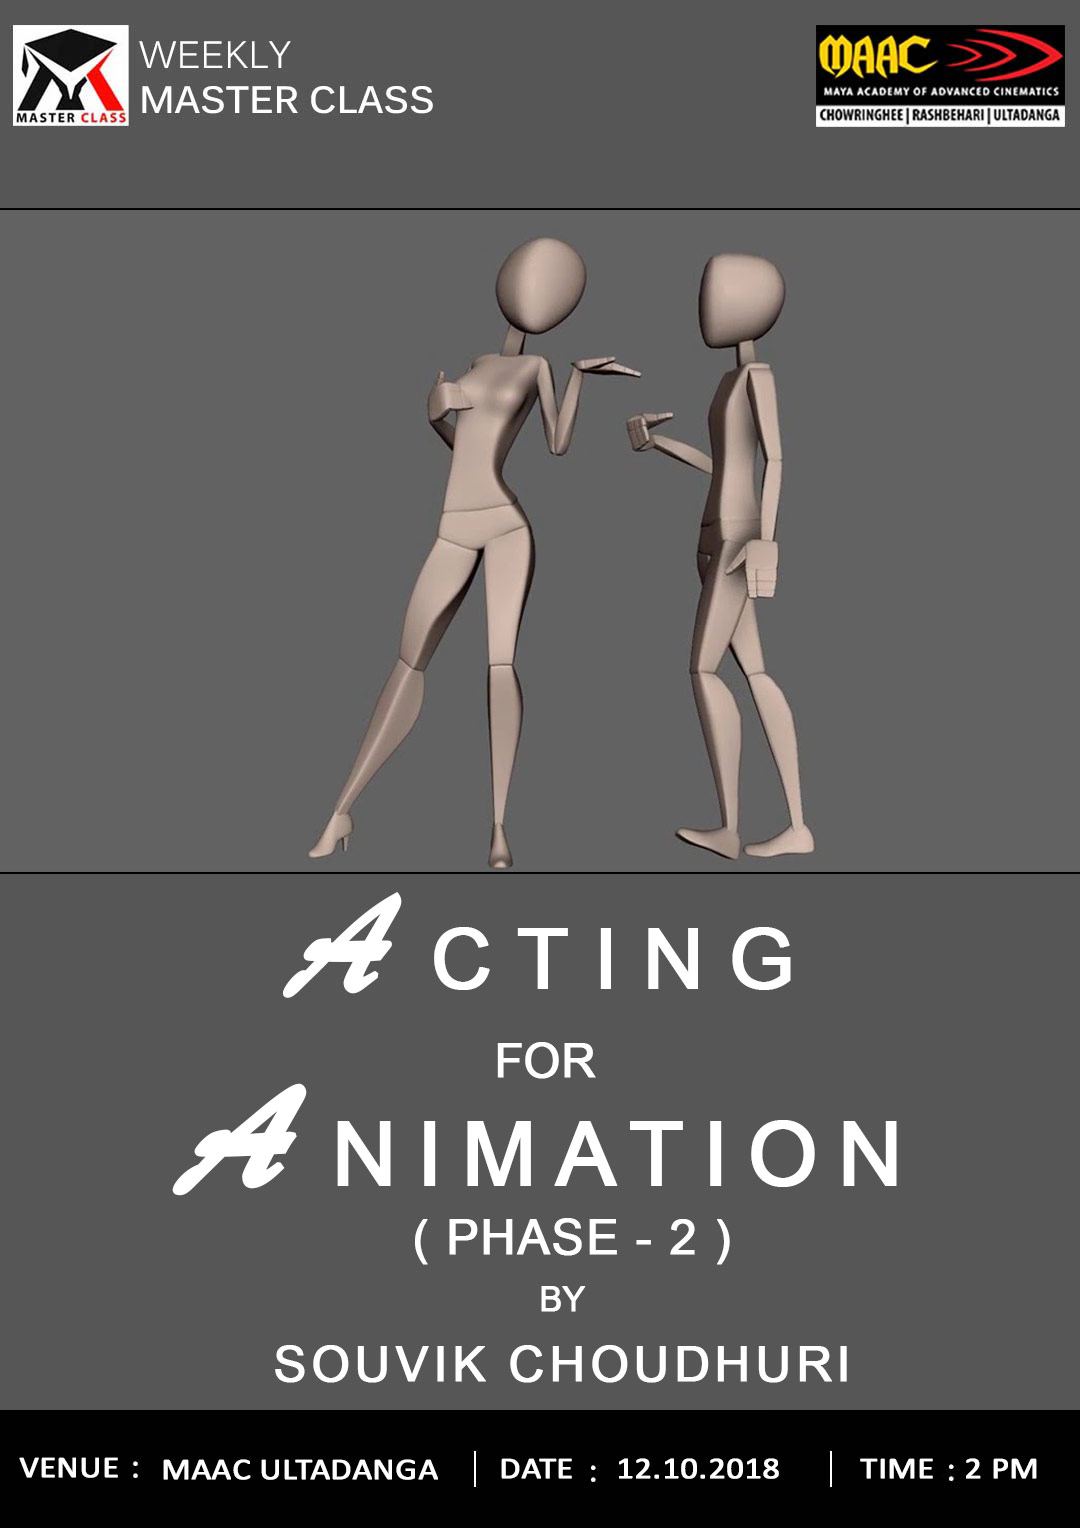 Weekly Master Class on Acting for Animation Phase- 2